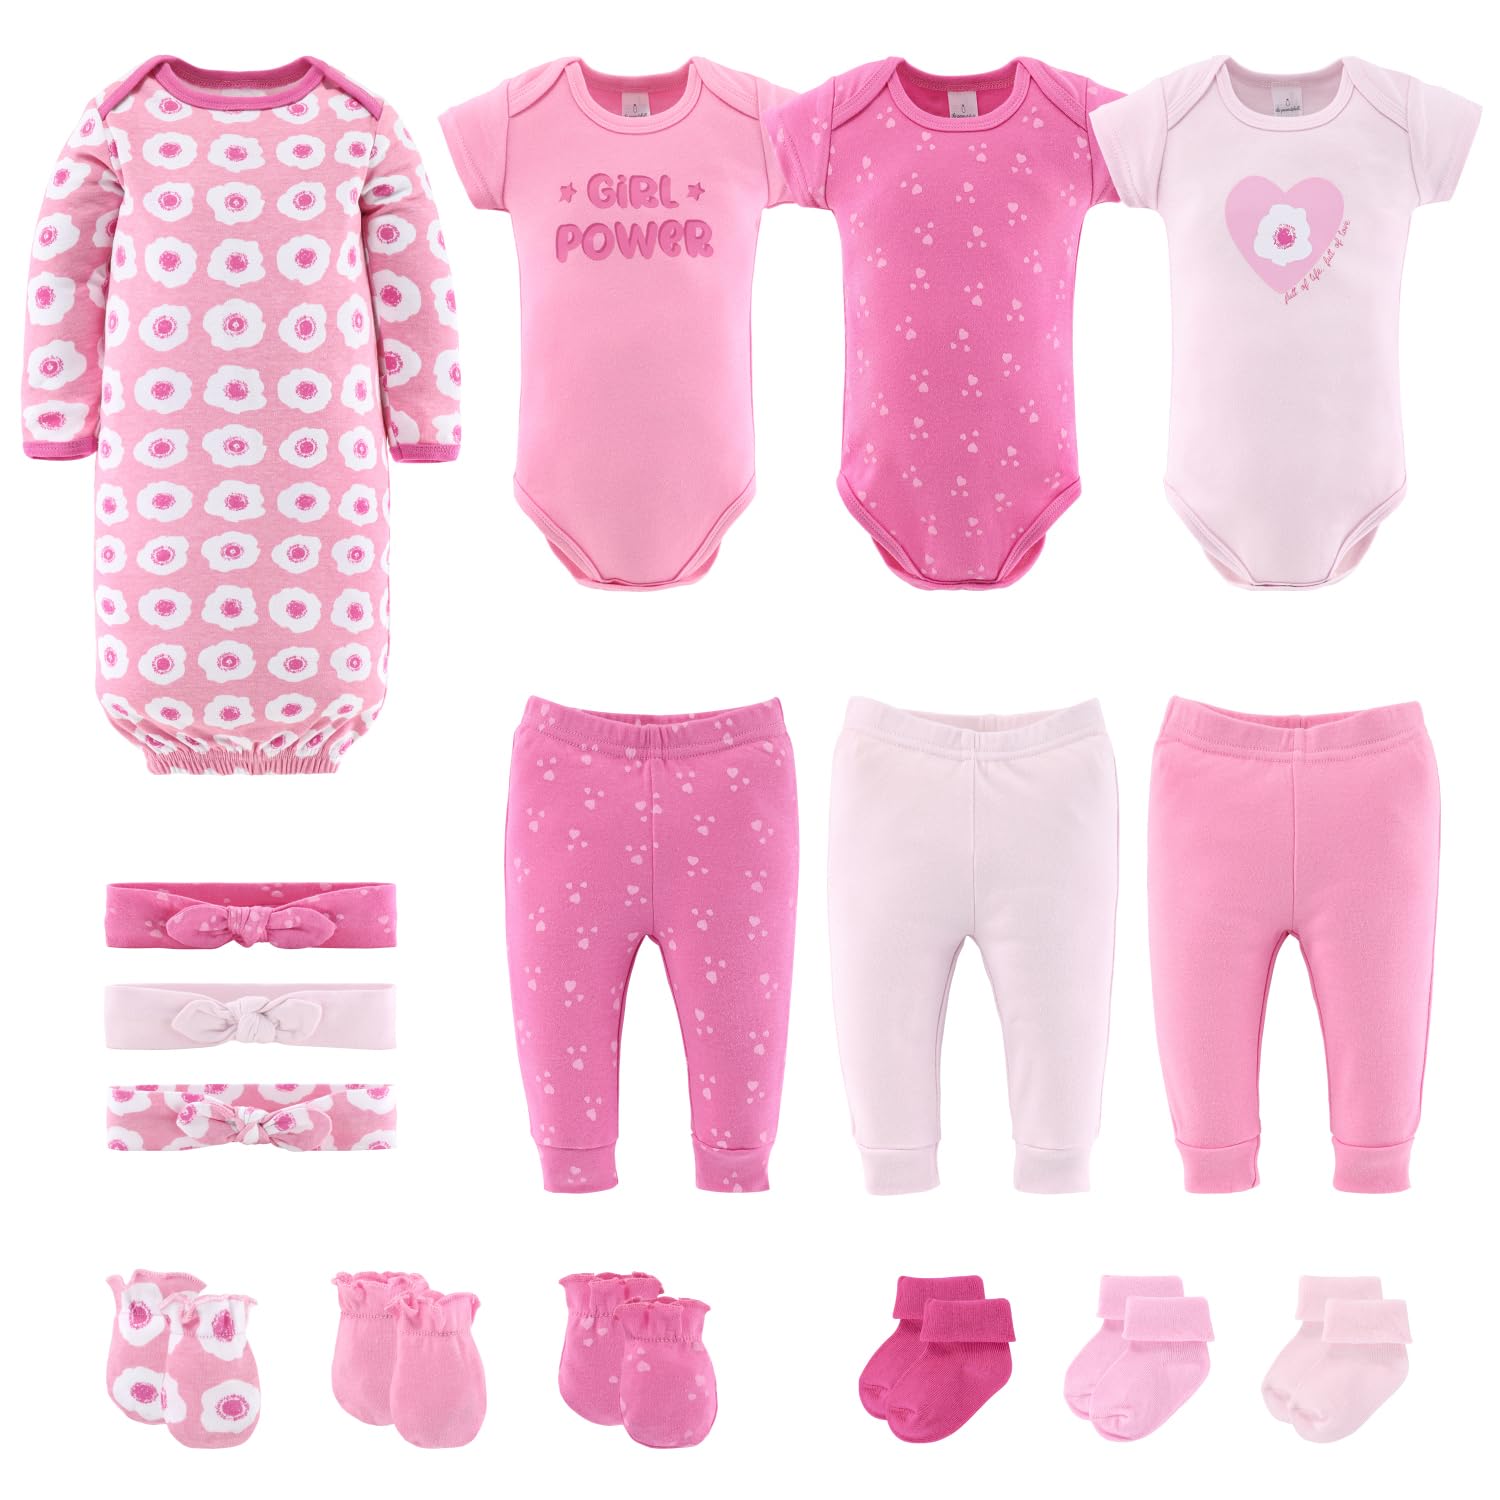 The Peanutshell Newborn Girl Clothes & EssentIals Set, 16 Piece Baby Layette Gift Set, 0-3 Month Outfits